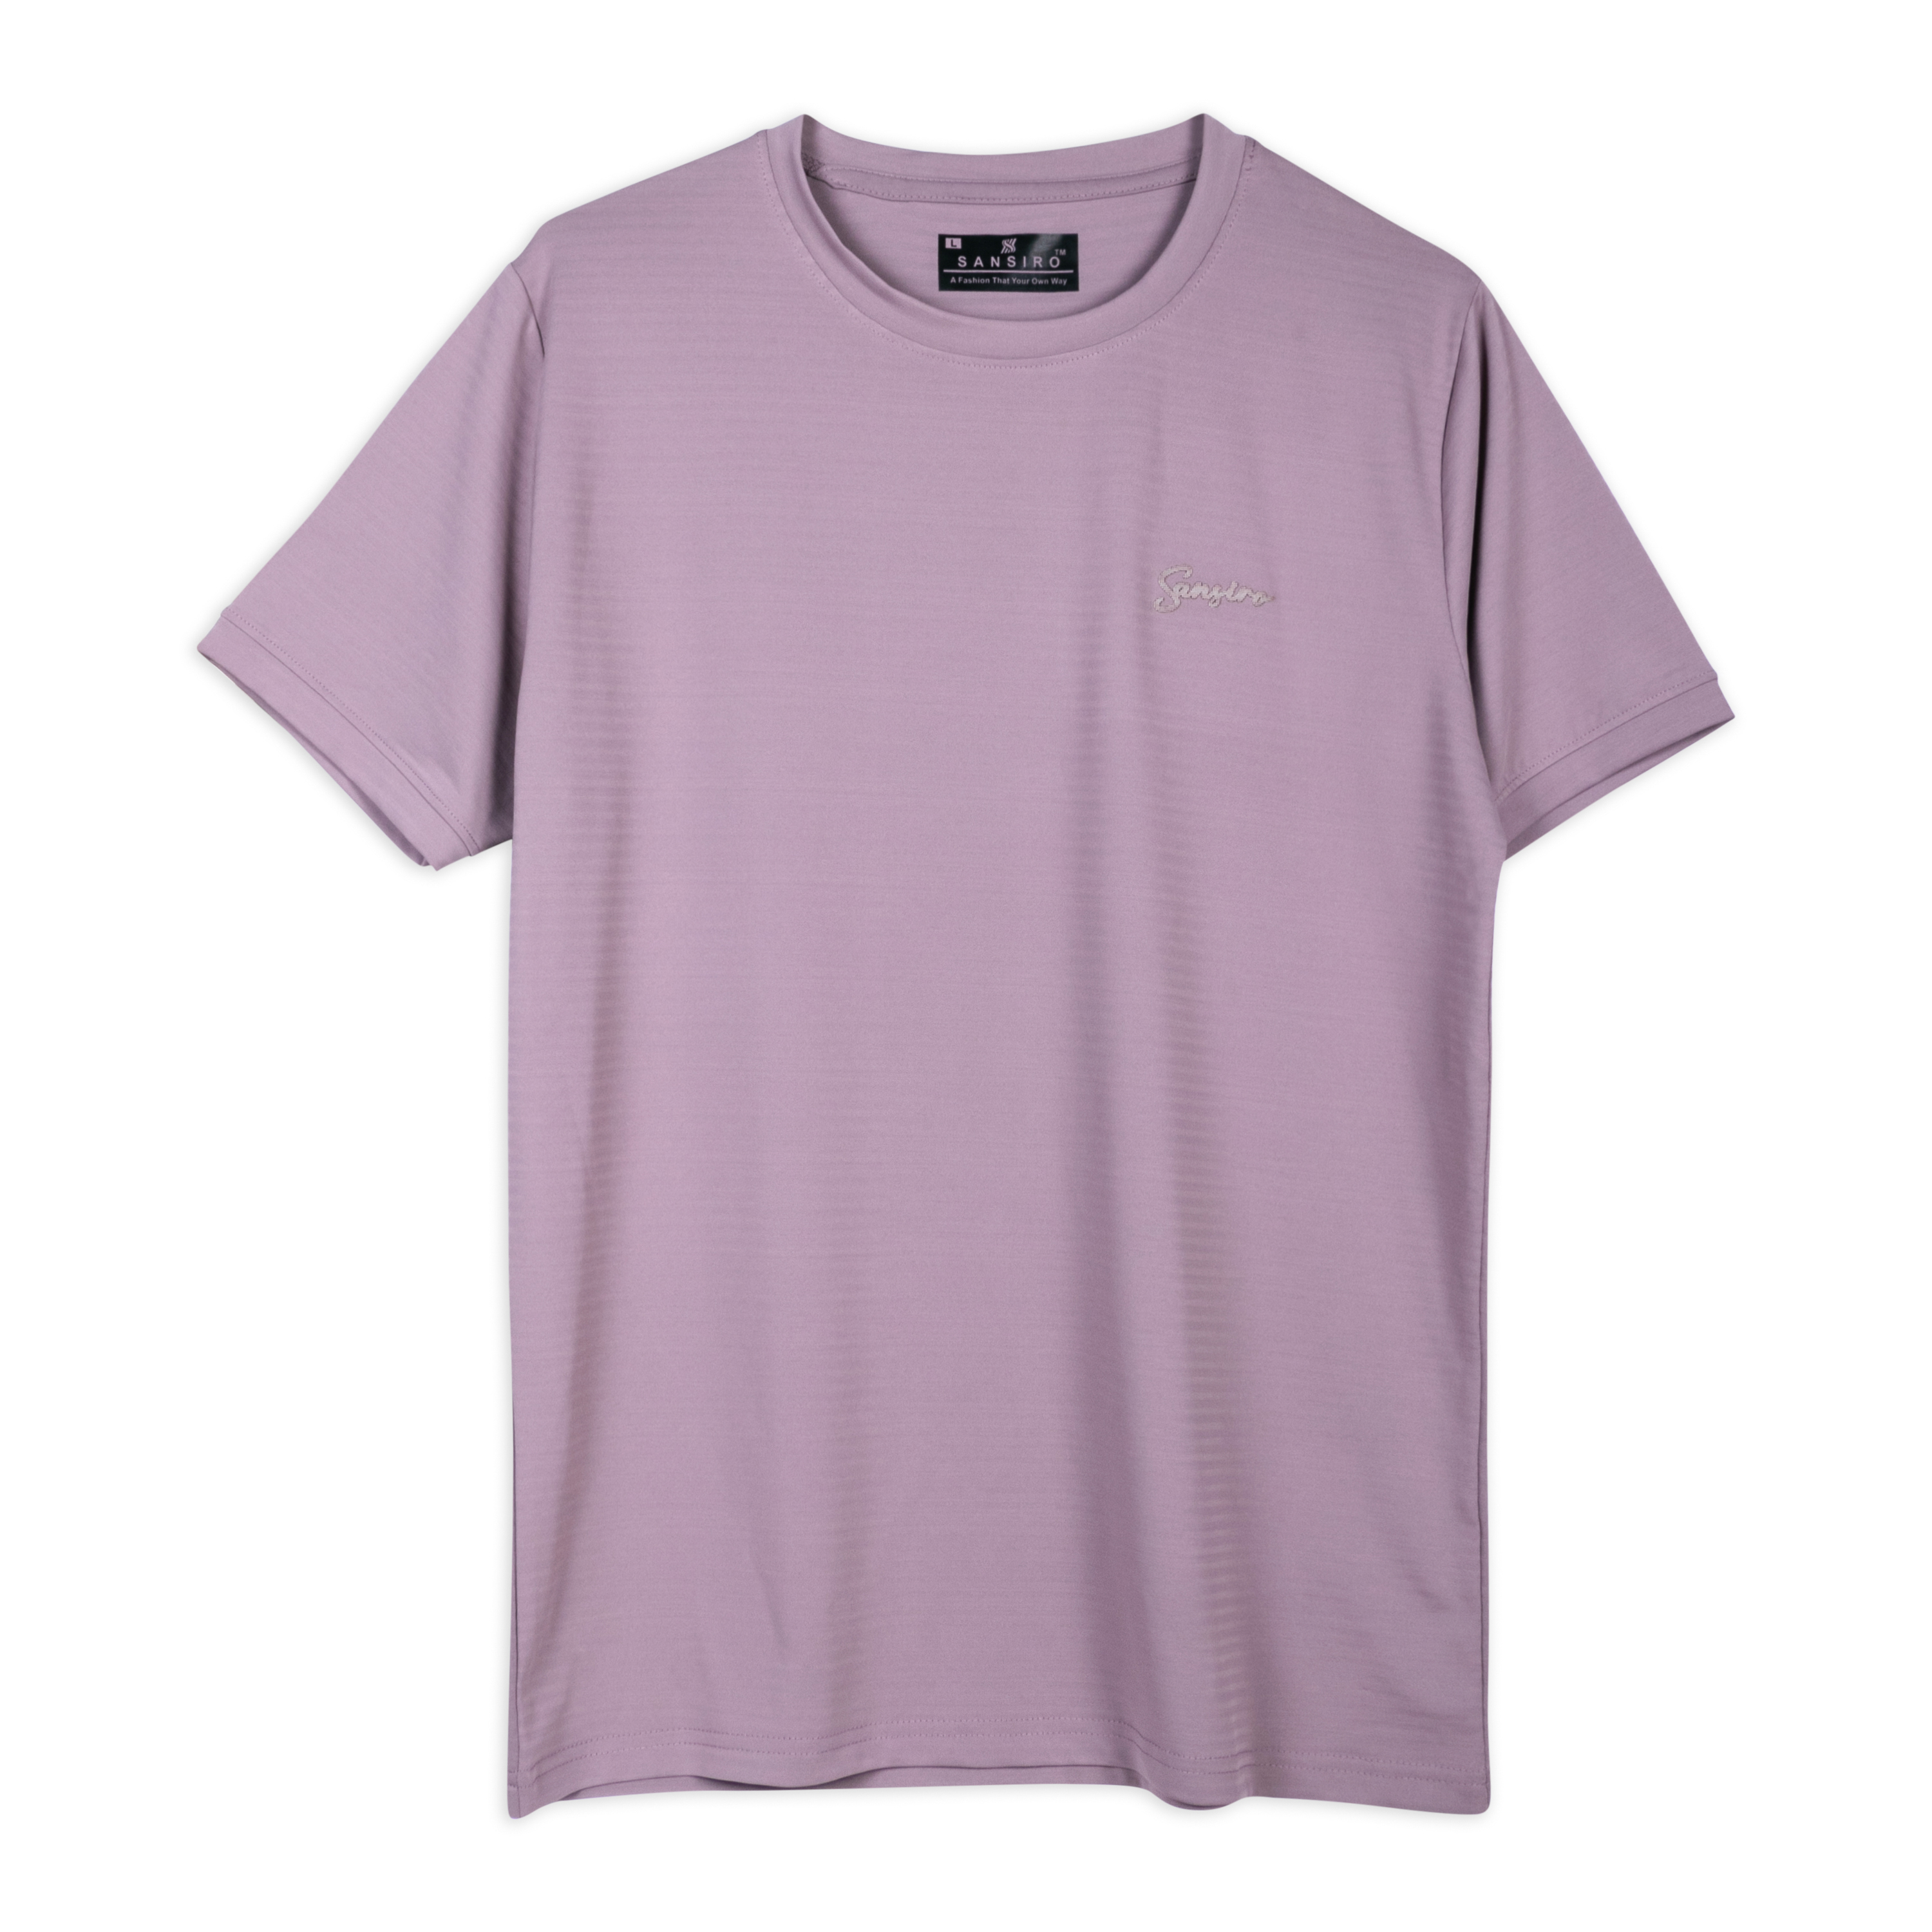 Classic Narrow Sailor Stripes Purple Tshirt with Round Neck